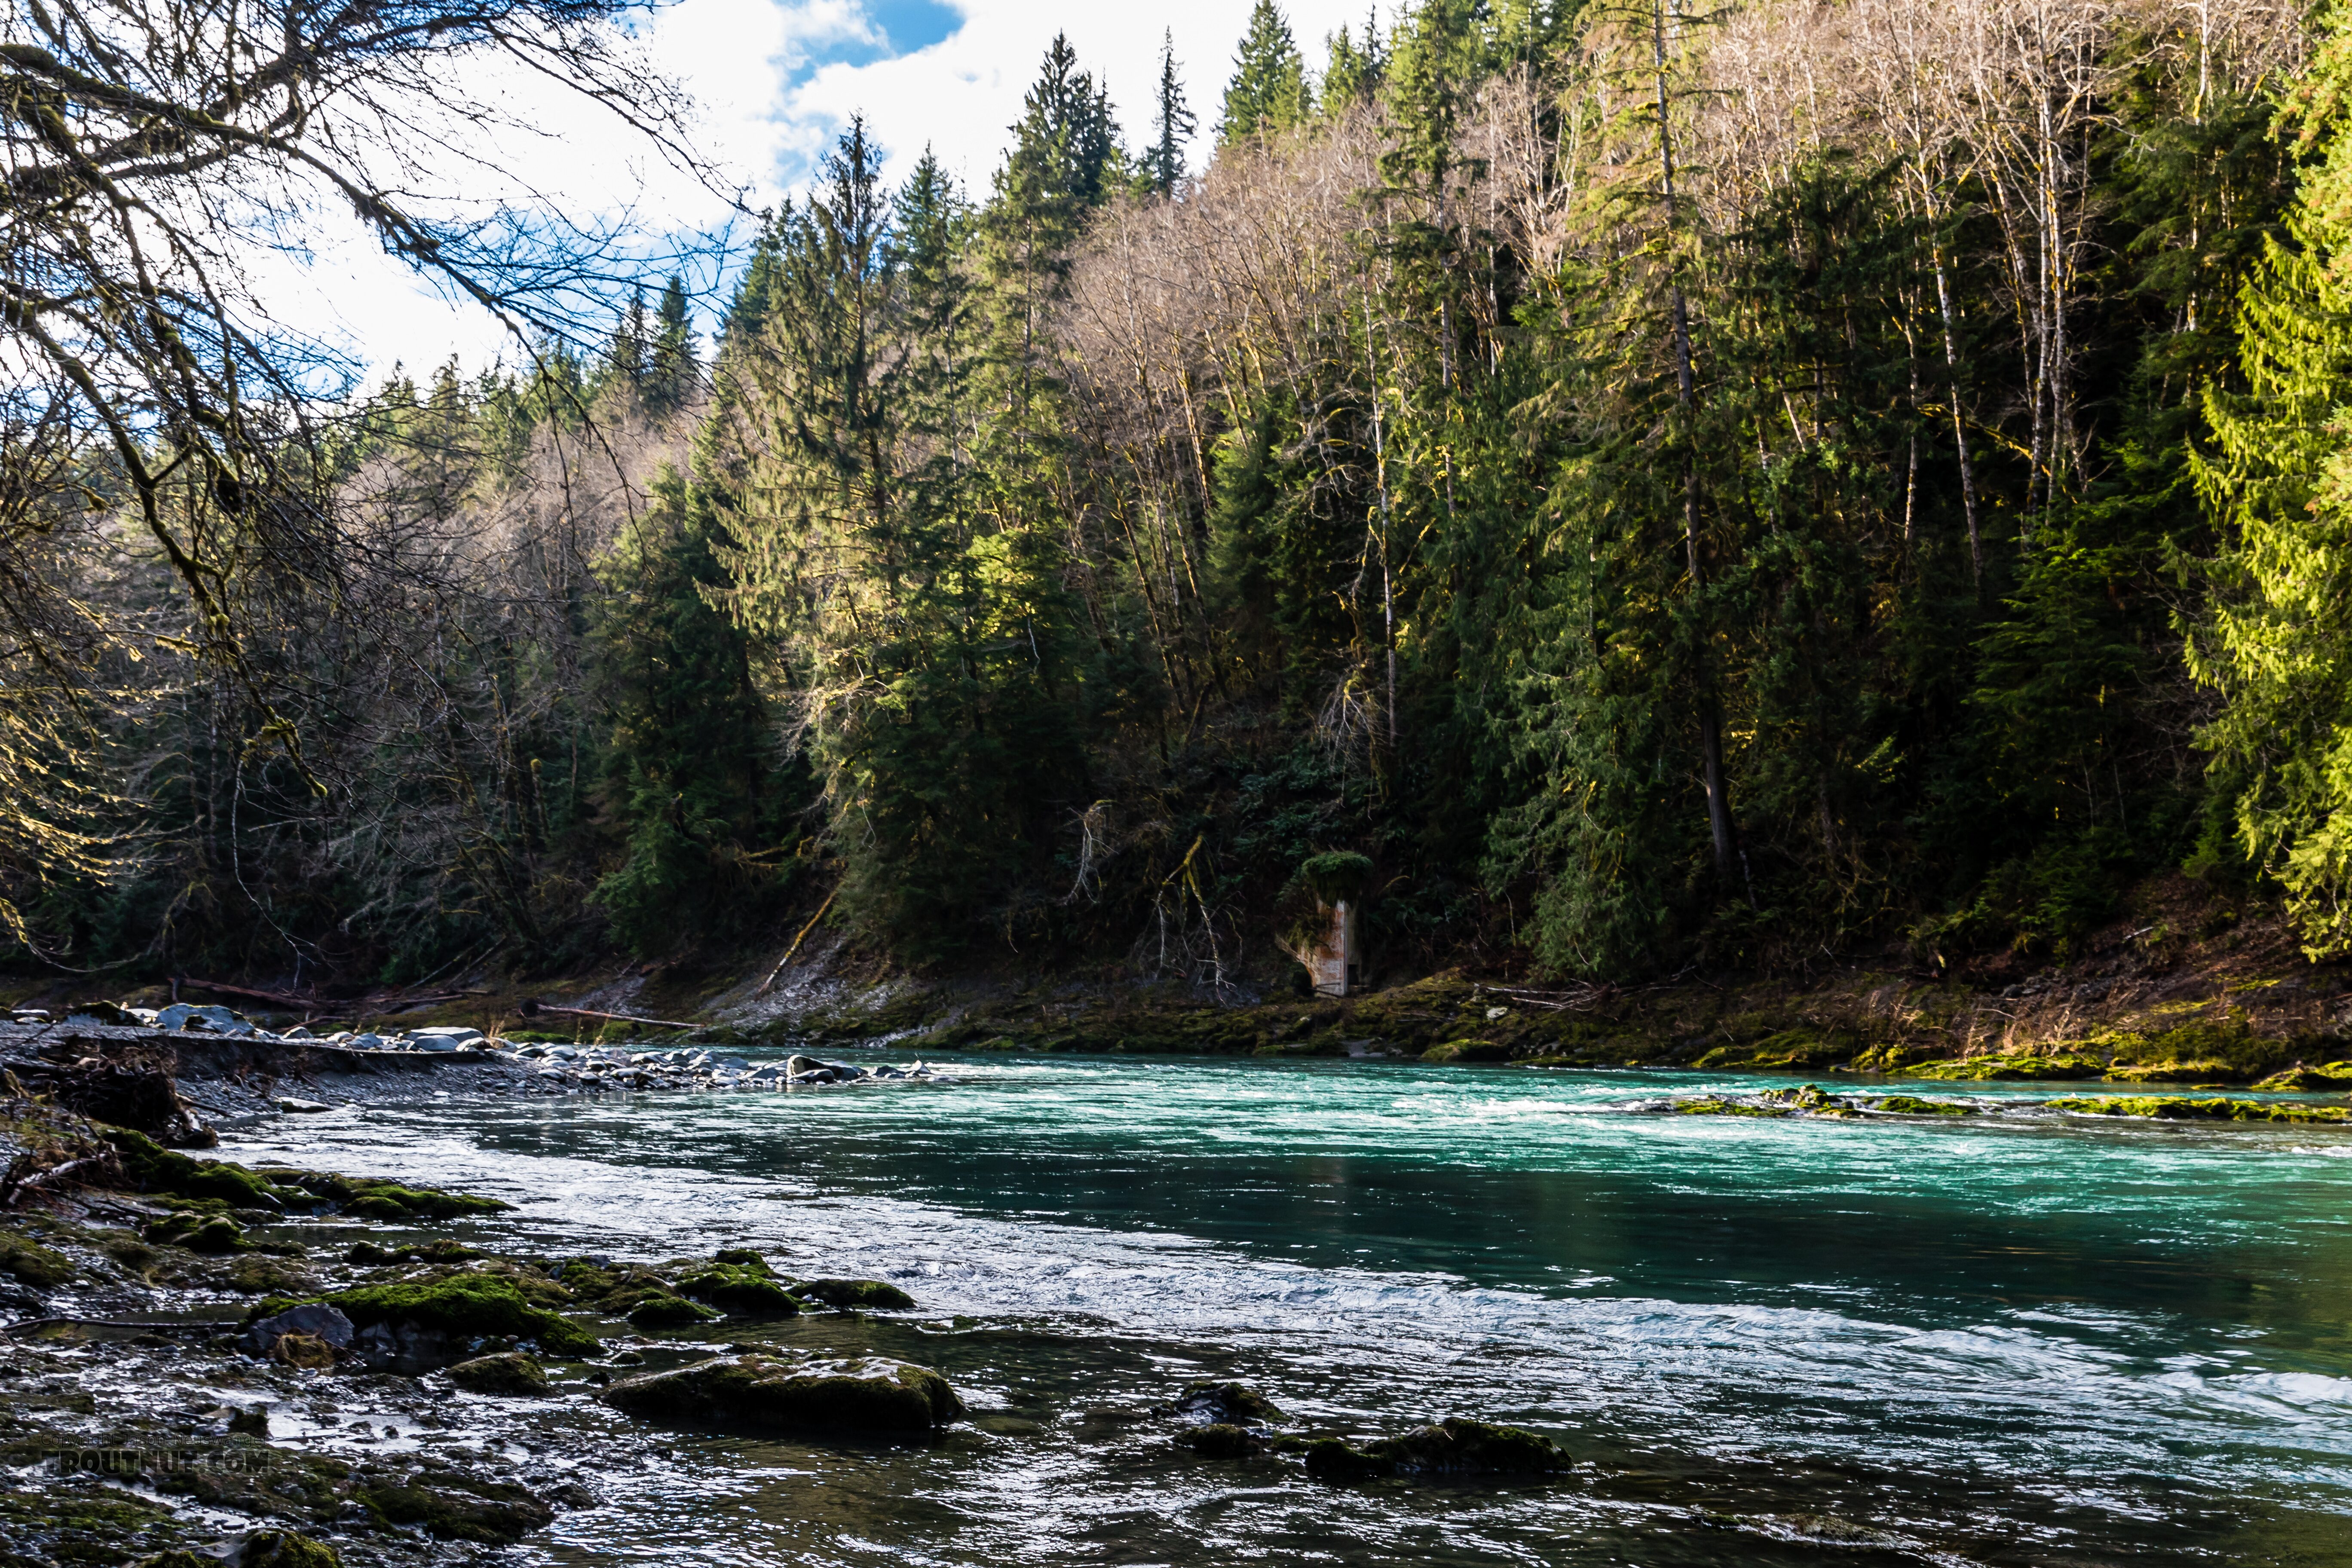  From the Hoh River in Washington.